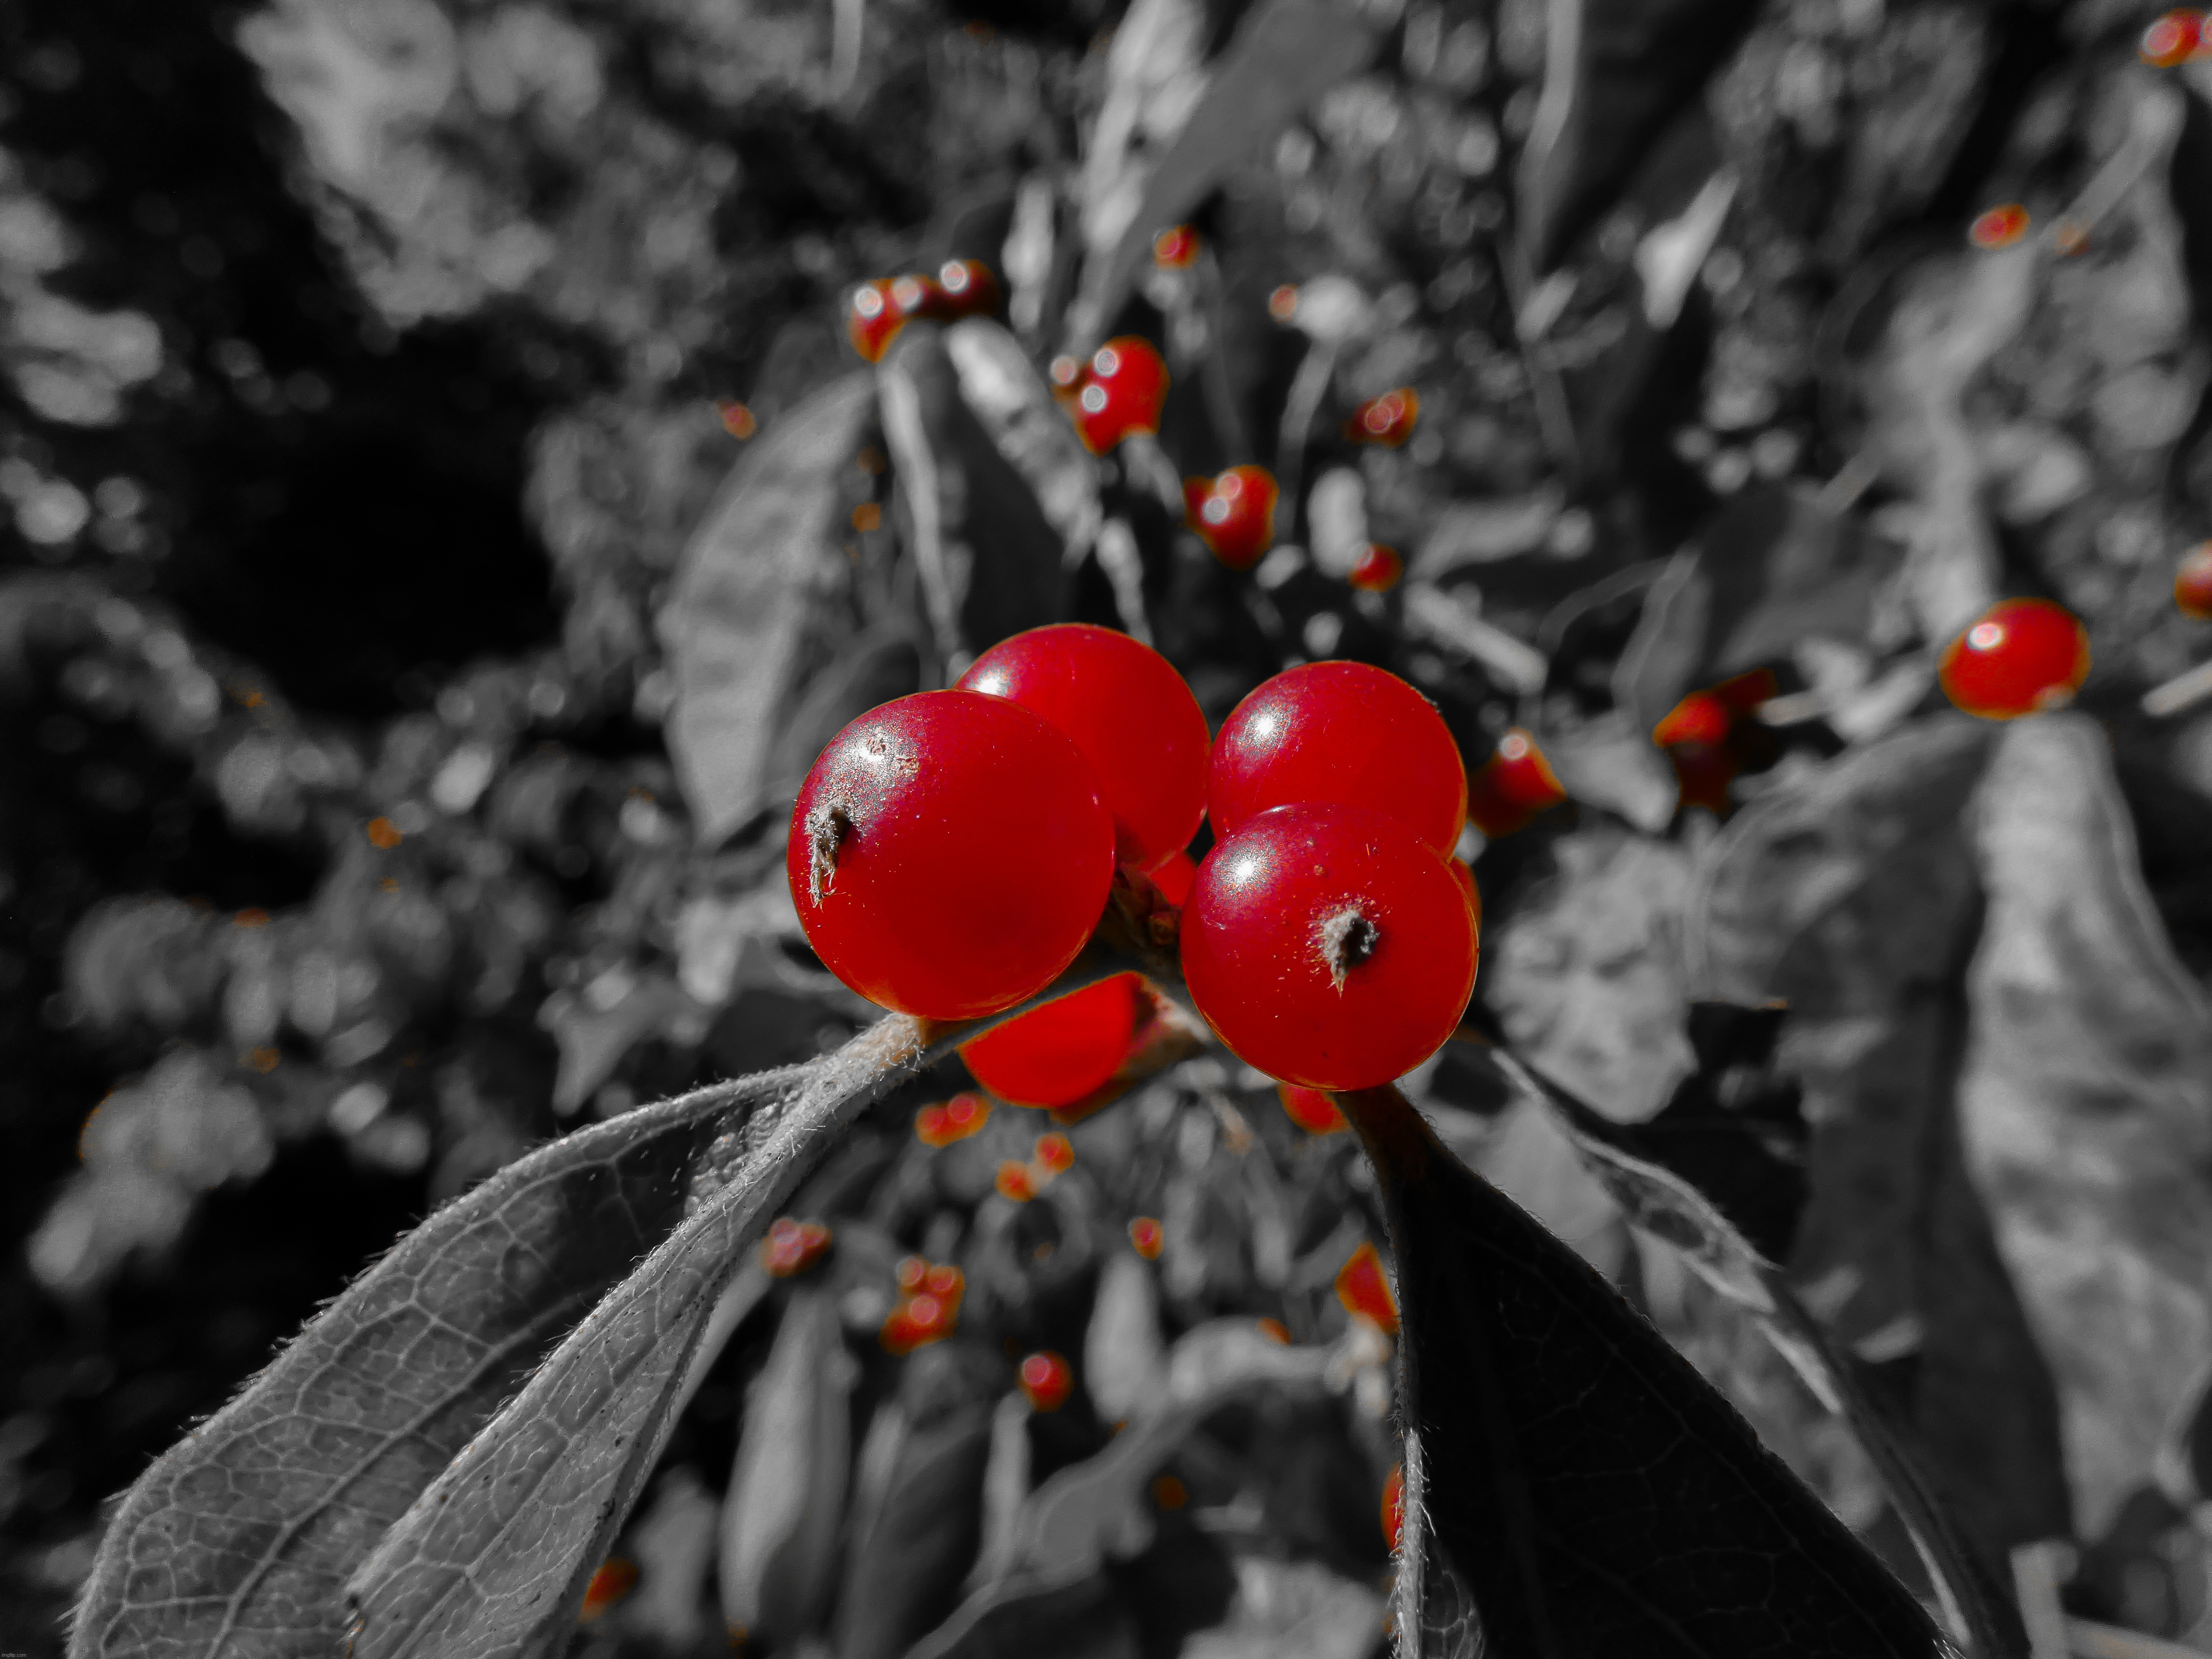 A picture of some berries that I took, I desaturated every color except for red to give it a cool b&w effect. | image tagged in share your own photos | made w/ Imgflip meme maker